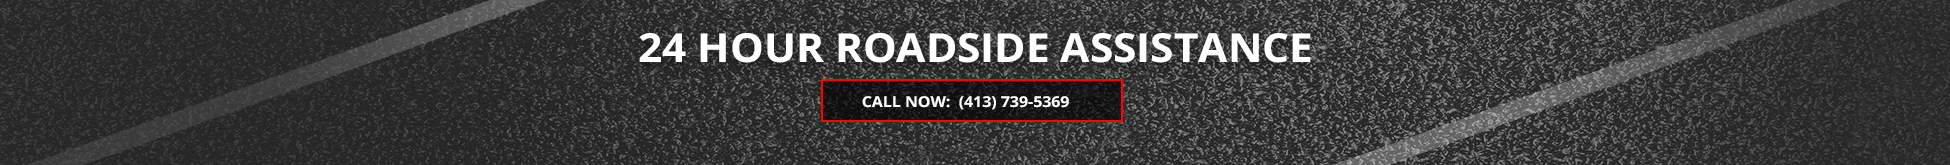 24 Hour Roadside Assistance - Call Now